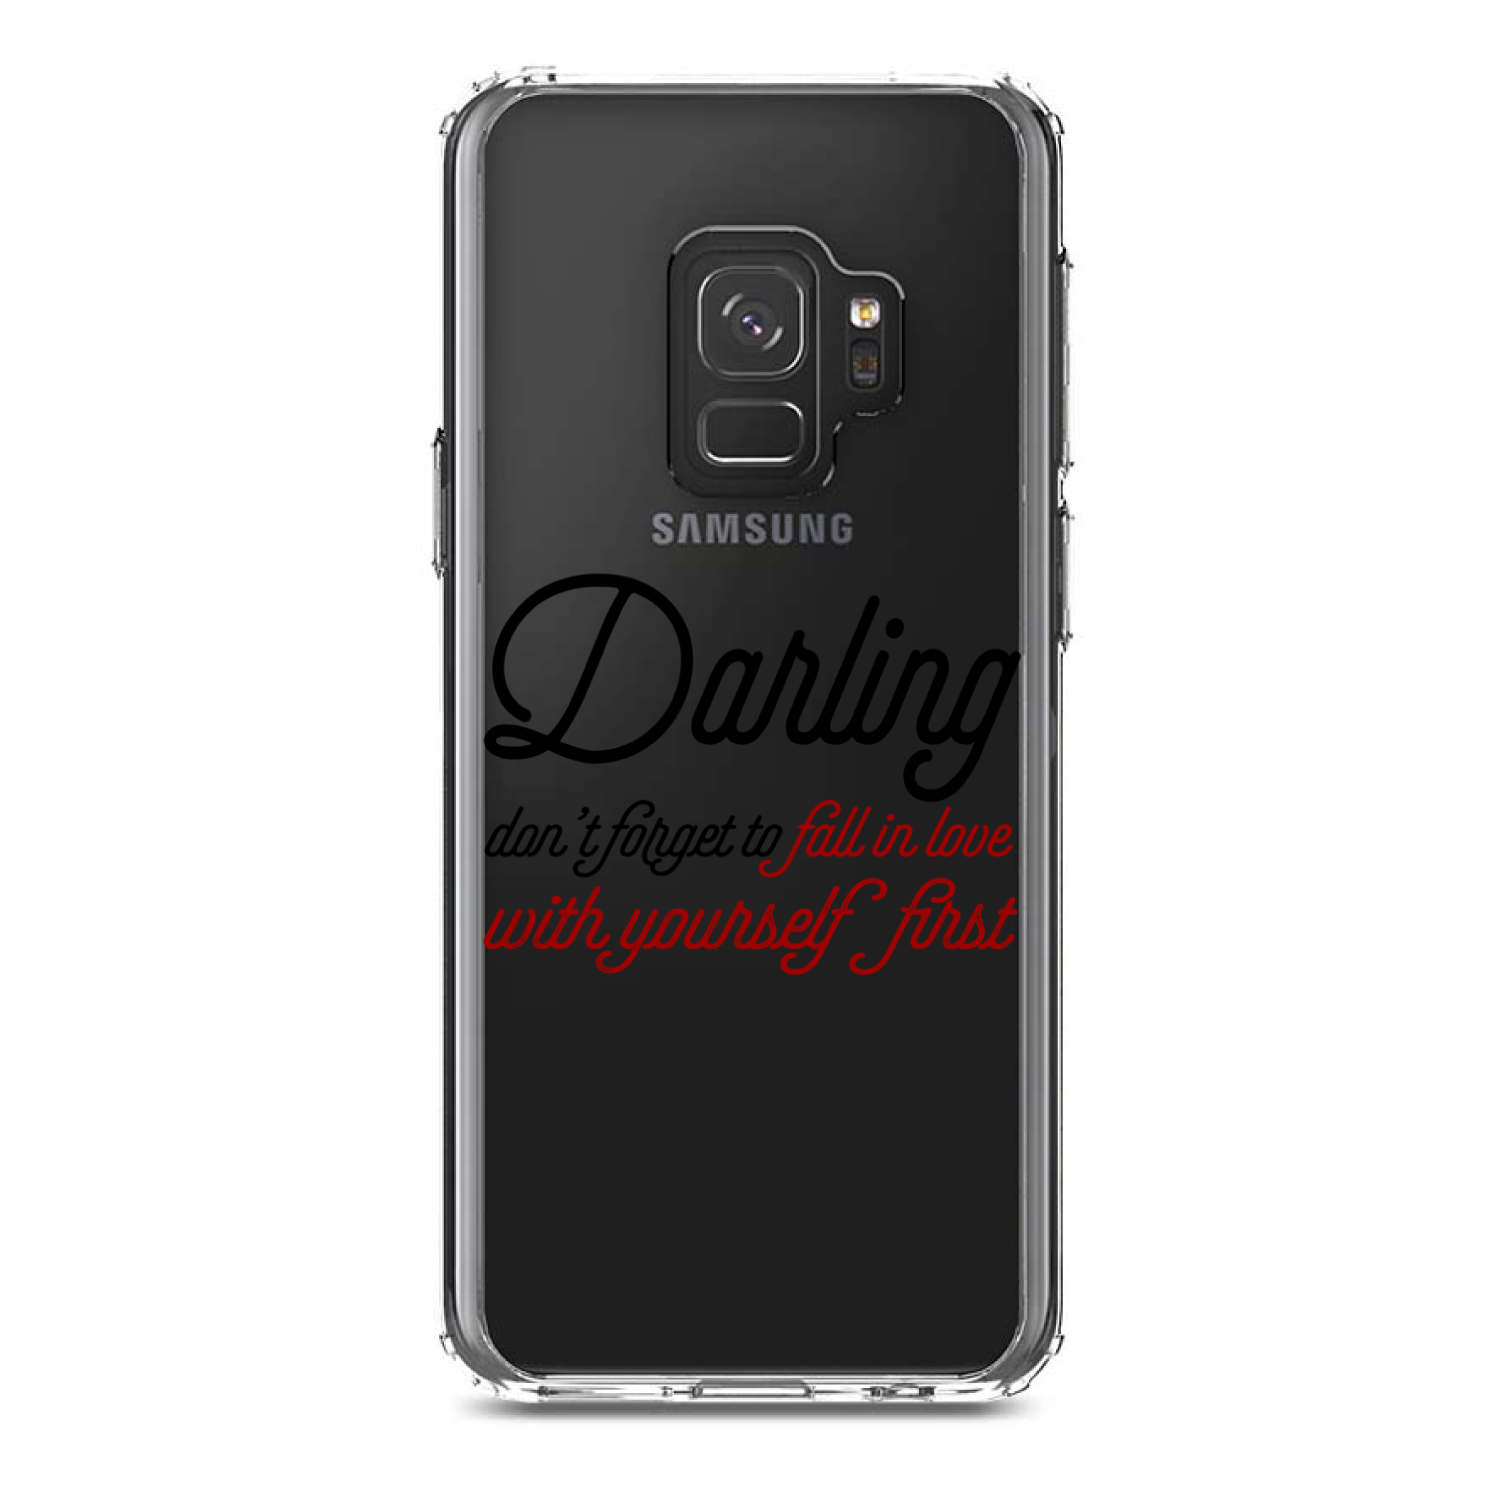 DistinctInk Clear Shockproof Hybrid Case for Samsung Galaxy S9 (5.8" Screen) - TPU Bumper Acrylic Back Tempered Glass Screen Protector - Darling Don't Forget to Fall In Love with Yourself - image 1 of 5